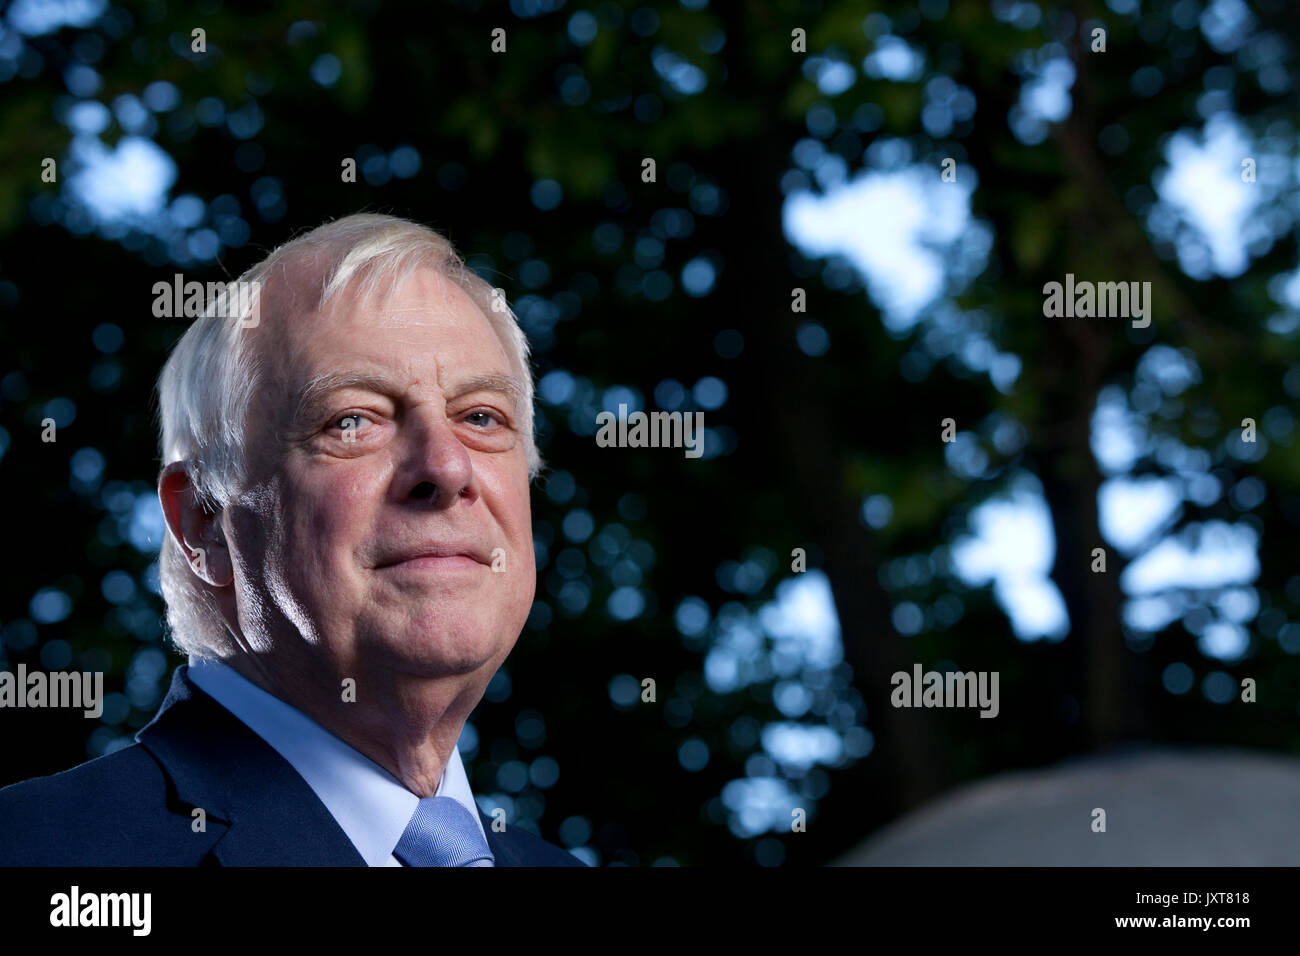 Edinburgh, UK. 17th August 2017.  Chris Patten (Christopher Francis Patten, Baron Patten of Barnes, CH, PC), is a crossbench member of the British House of Lords and a former British Conservative politician until 2011, appearing at the Edinburgh International Book Festival. Gary Doak / Alamy Live News Stock Photo